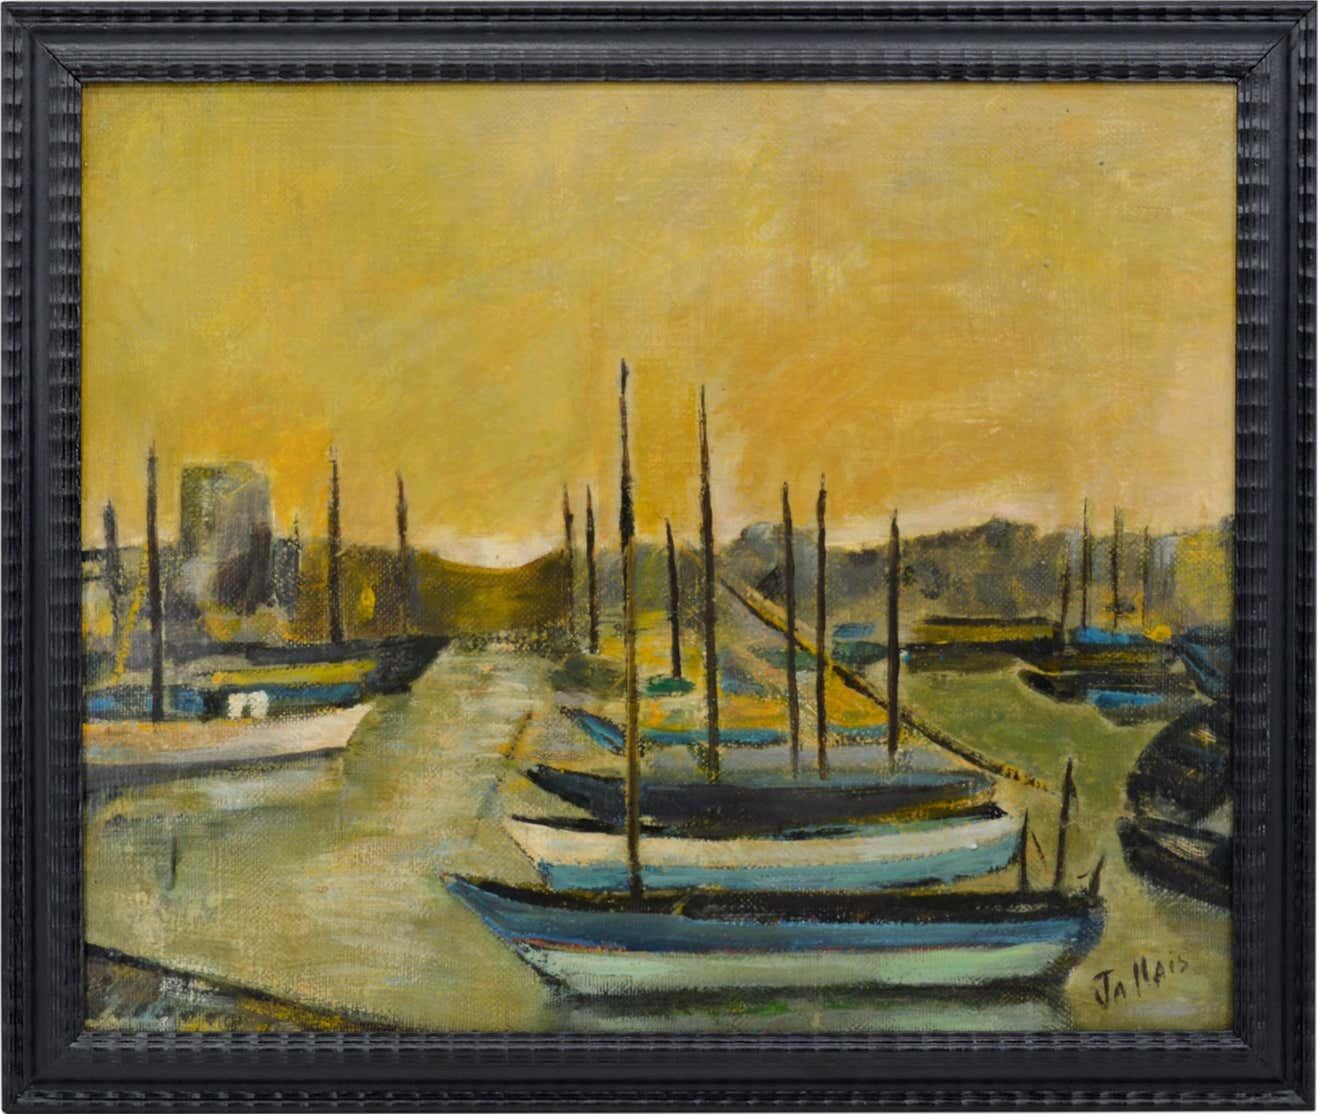 Oil on canvas by Jallais, France, 1960s. Boats in port. In its pretty dark brown wooden frame. With frame: 68x58 cm - 26.8x22.8 inches, without frame: 61x50 cm - 24x19.7 inches. 12F format. Signed lower right "Jallais". Inscription stamped on the